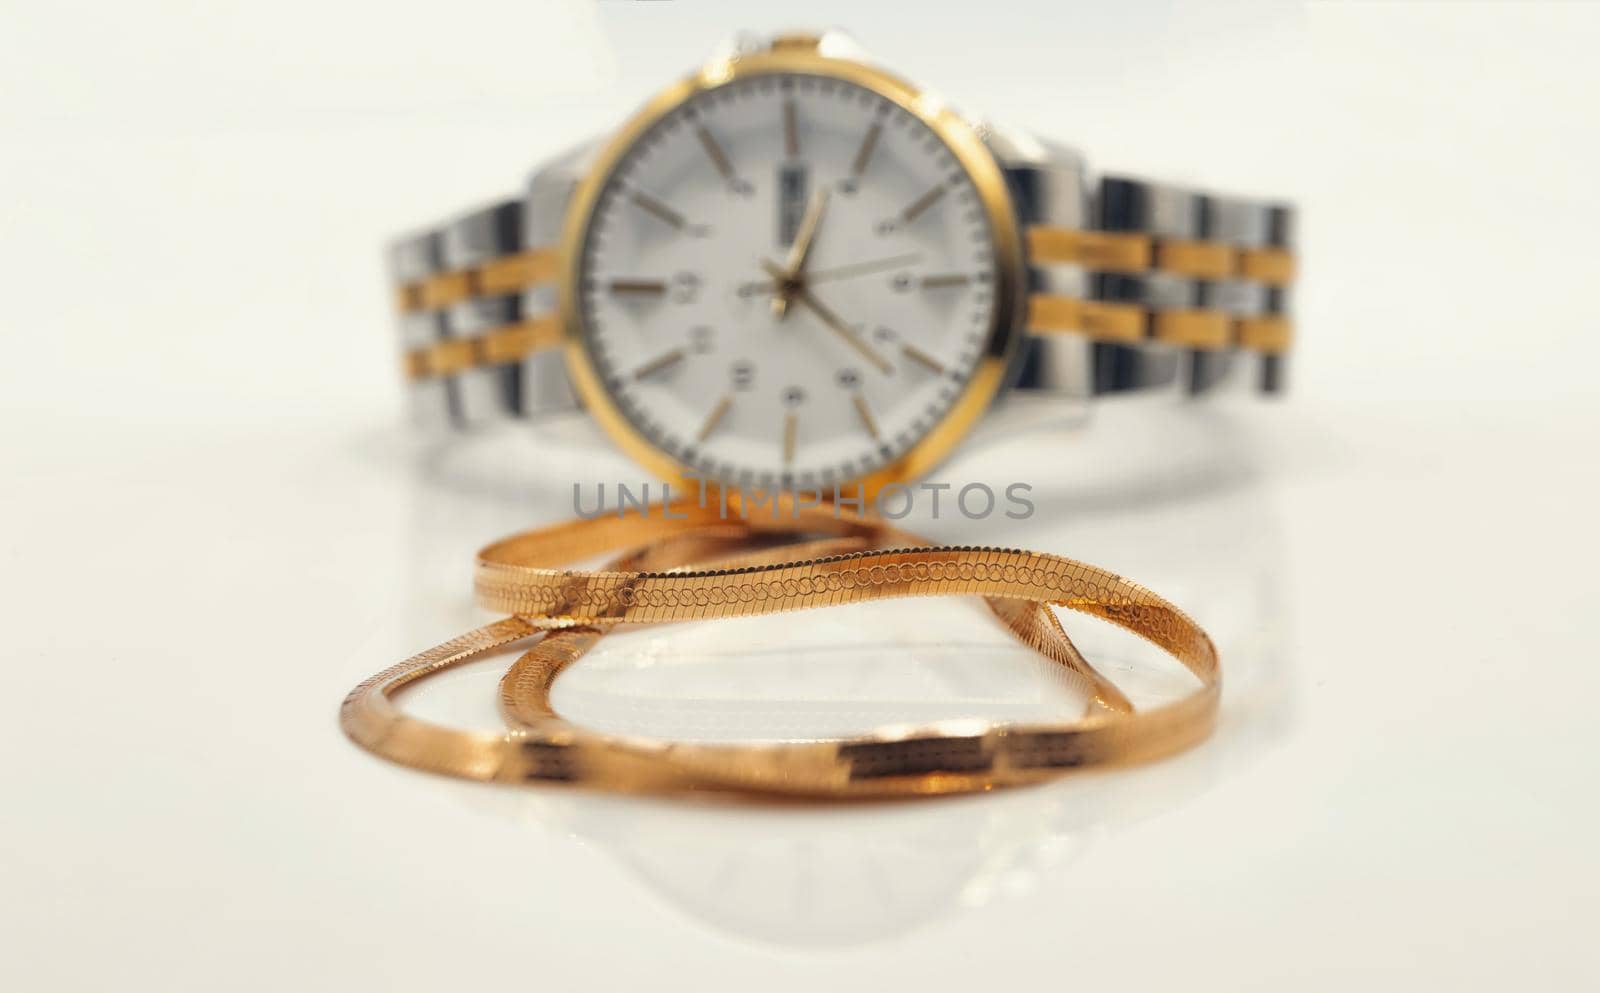 Elegant women's watch and gold chain with snakeskin weave by Berkut34